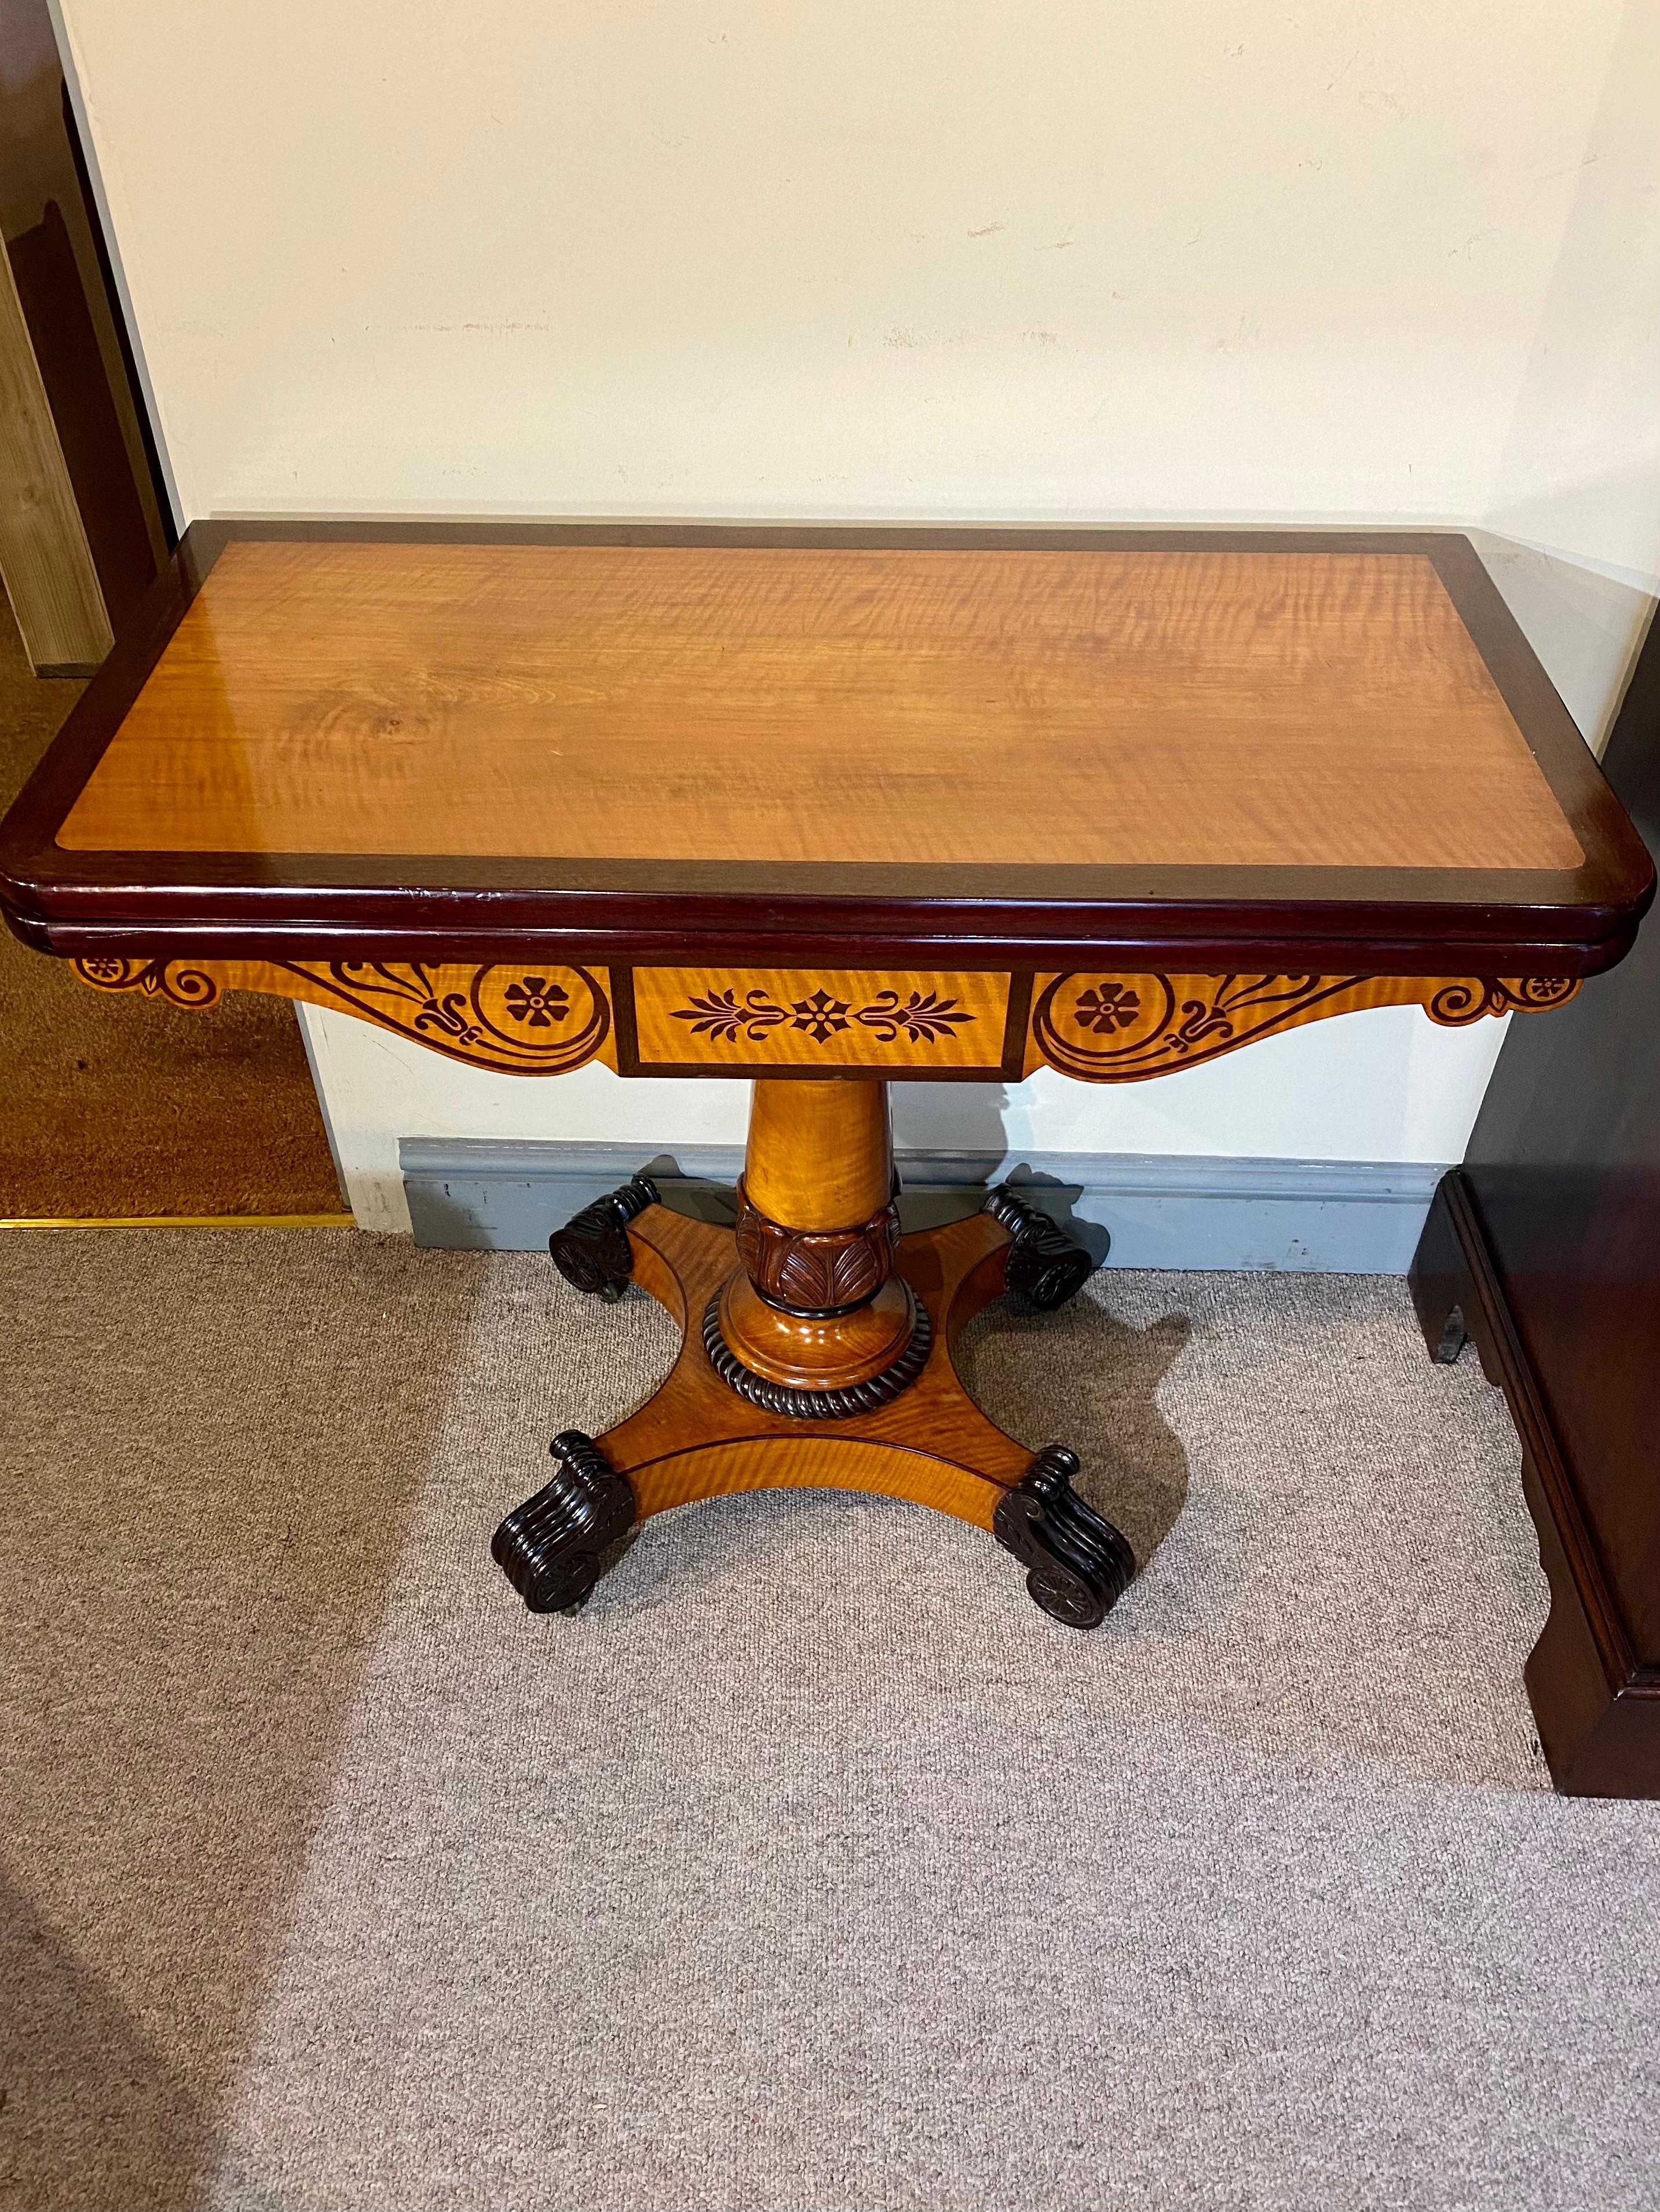 An exceptional Regency period Satinwood, Ebony and Purple Heart Tea Table. At the front of the table the beautifully figured satinwood top is upheld by shaped satinwood supports which are masterfully inlaid with Purple Heart, a very desirable